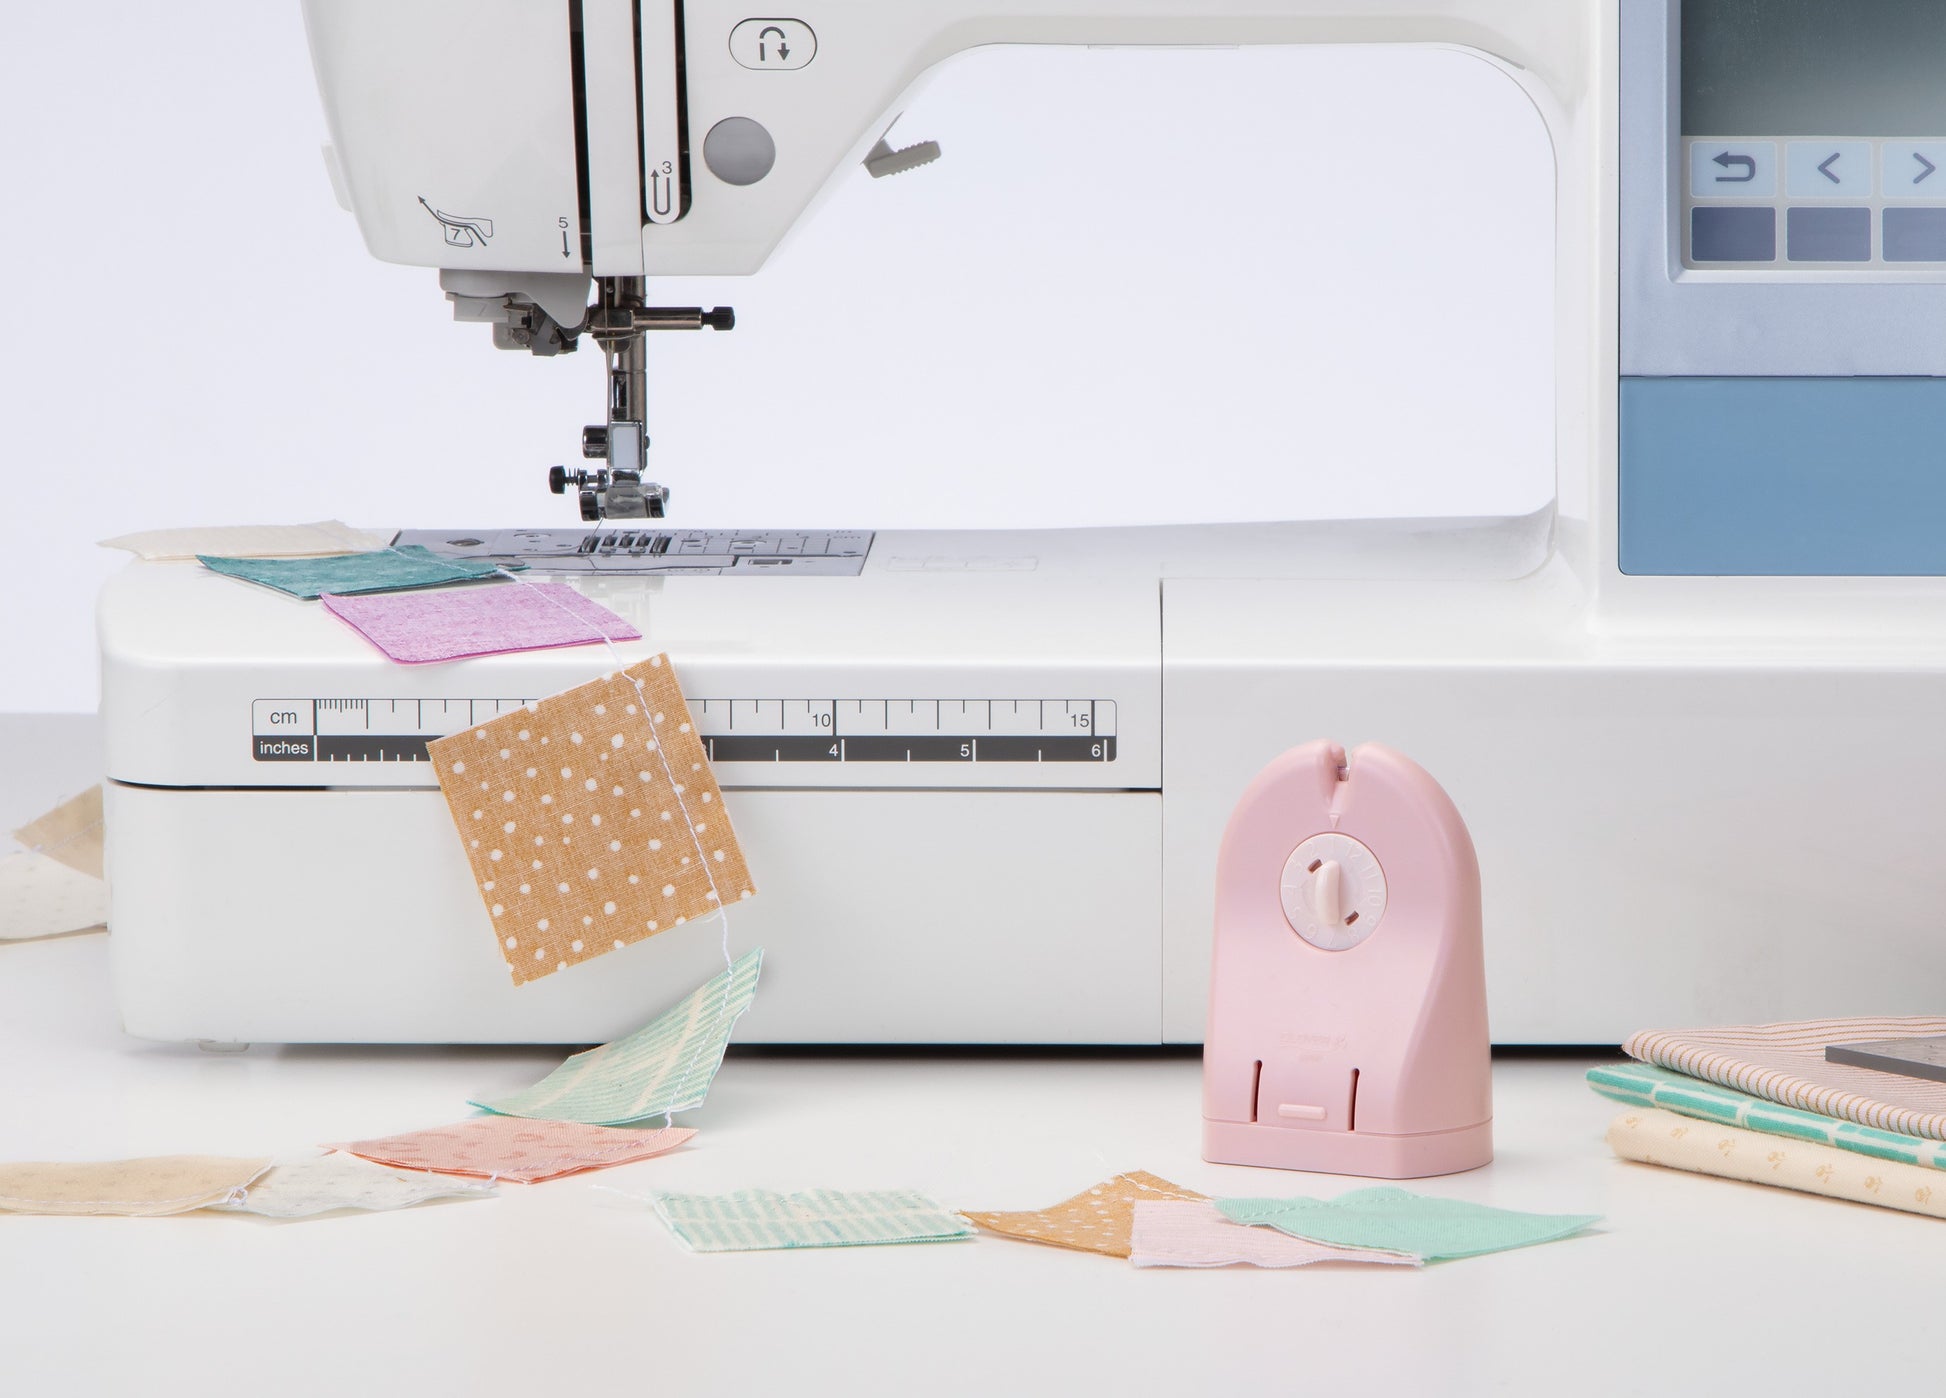 Clover Rotary Cutters are perfect for sewing, quilting, crafting